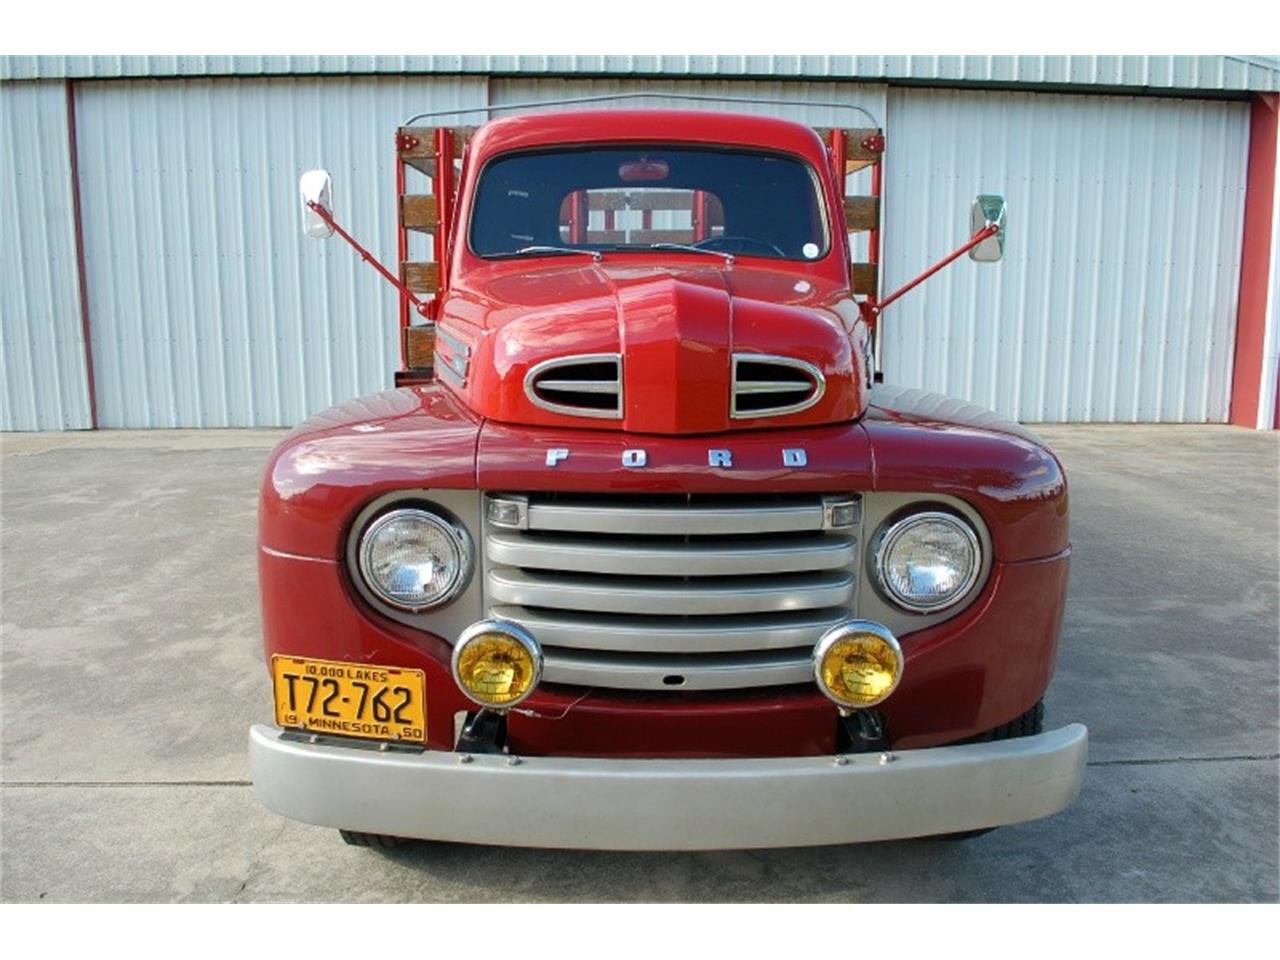 1950 Ford Flatbed Truck for Sale | 0 | CC-1199022